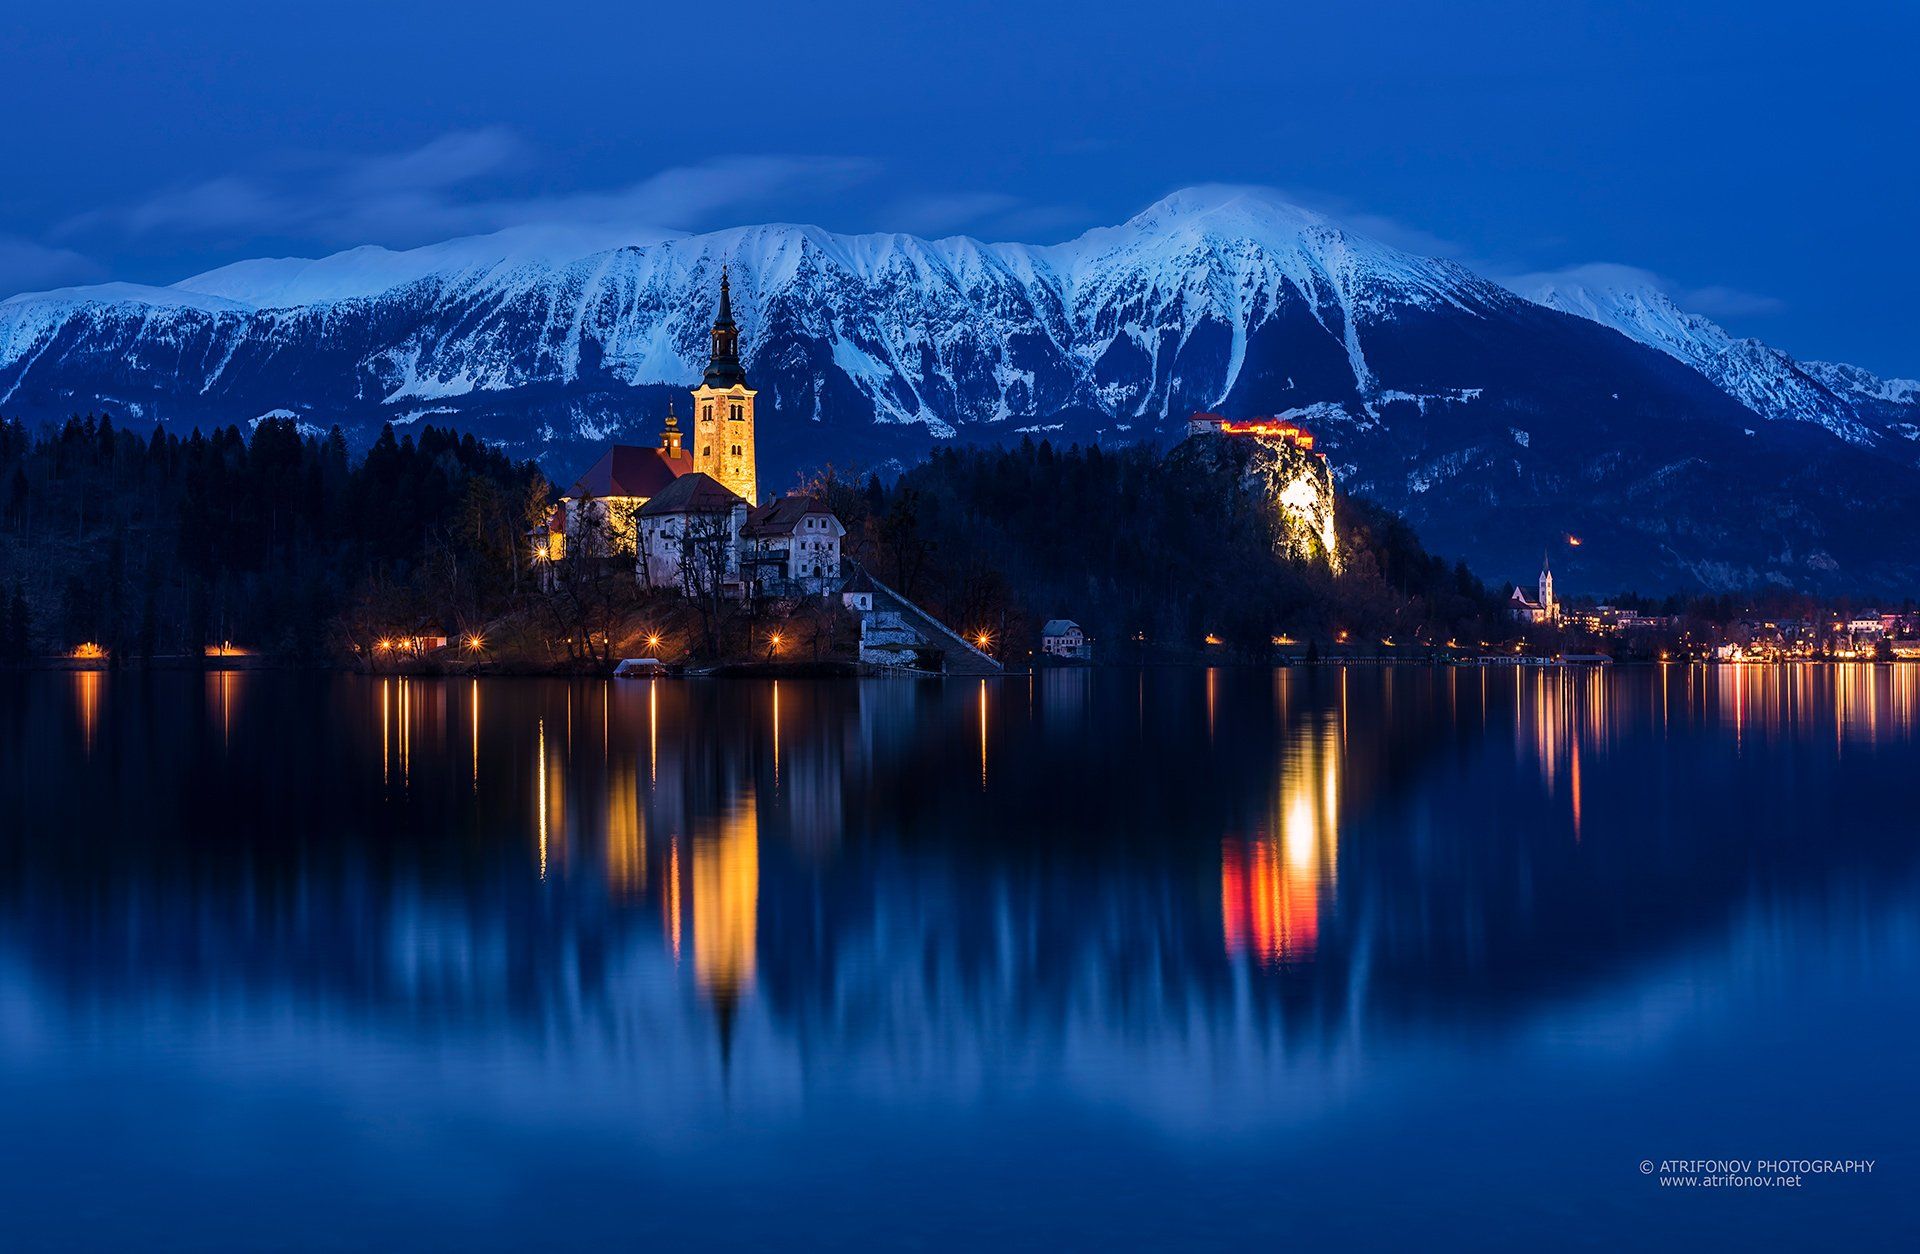 Bled, lake, Slovenia, Europe, night, mountain, winter, church, island, water, blue hour, snow, Alps, lights, rewflections, Andrey Trifonov